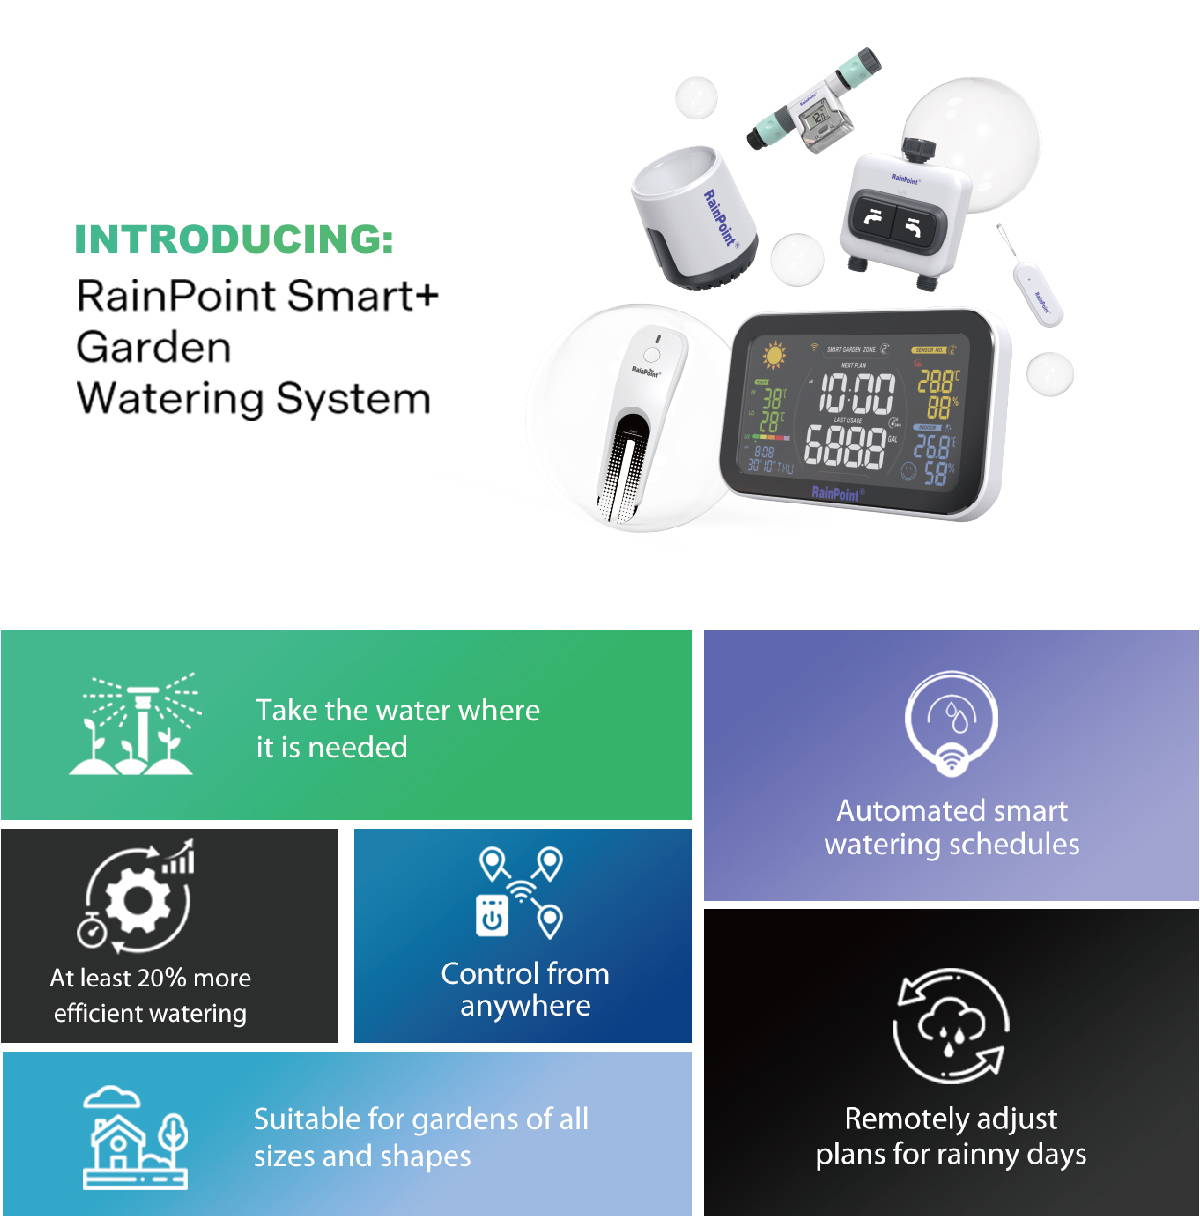 RainPoint is an intelligent irrigation system that integrates a Water Timer, Soil & Sunlight Sensor, Rain Gauge, and 0utdoor Thermometer for self-analysis and regulation.With RainPoint Smart+,you can experience the wonder of a future garden today.